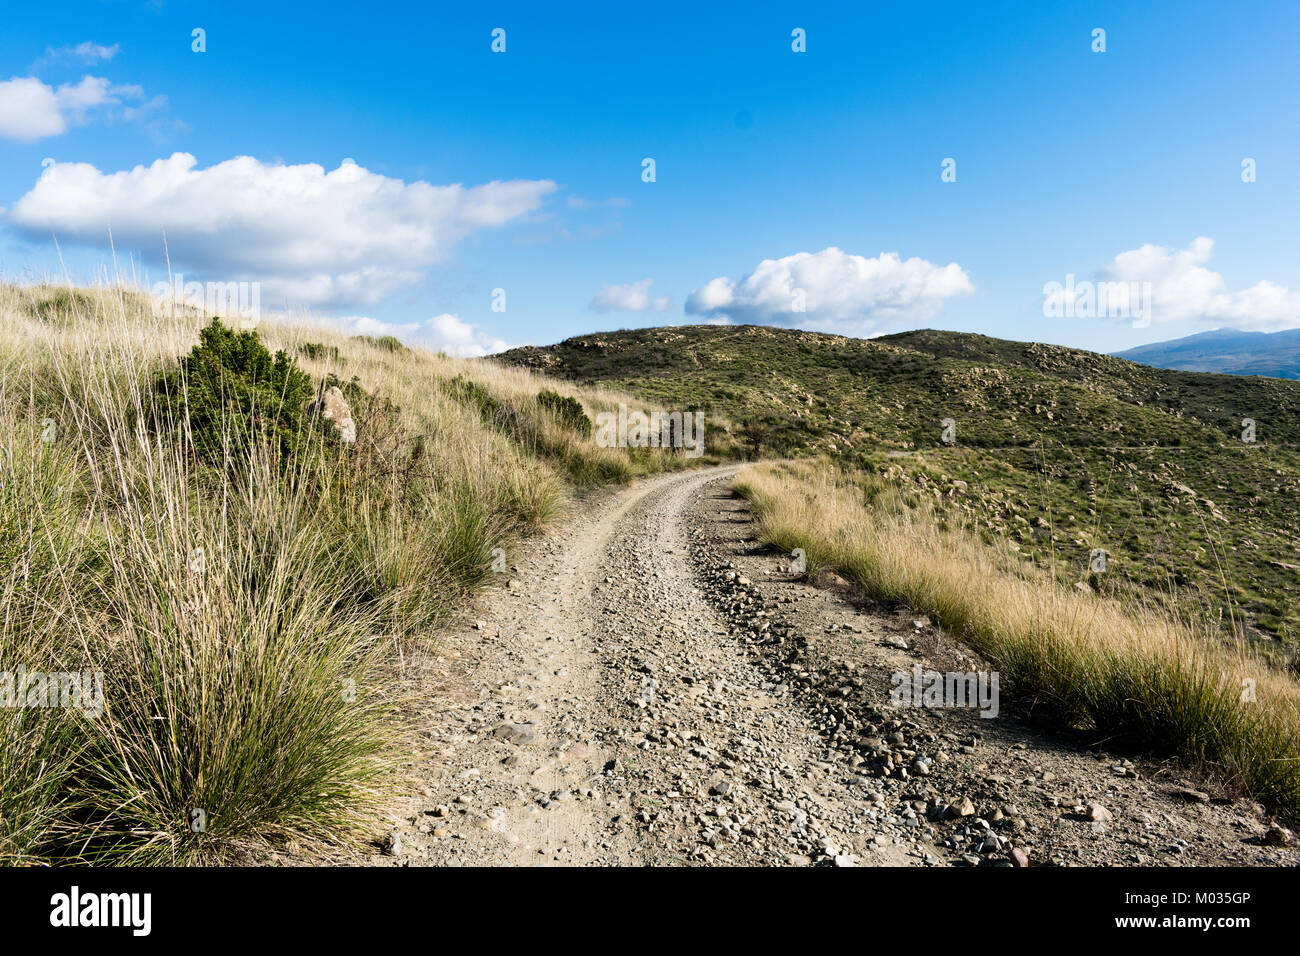 Dirt road on a hill, Cilento, Italy Stock Photo